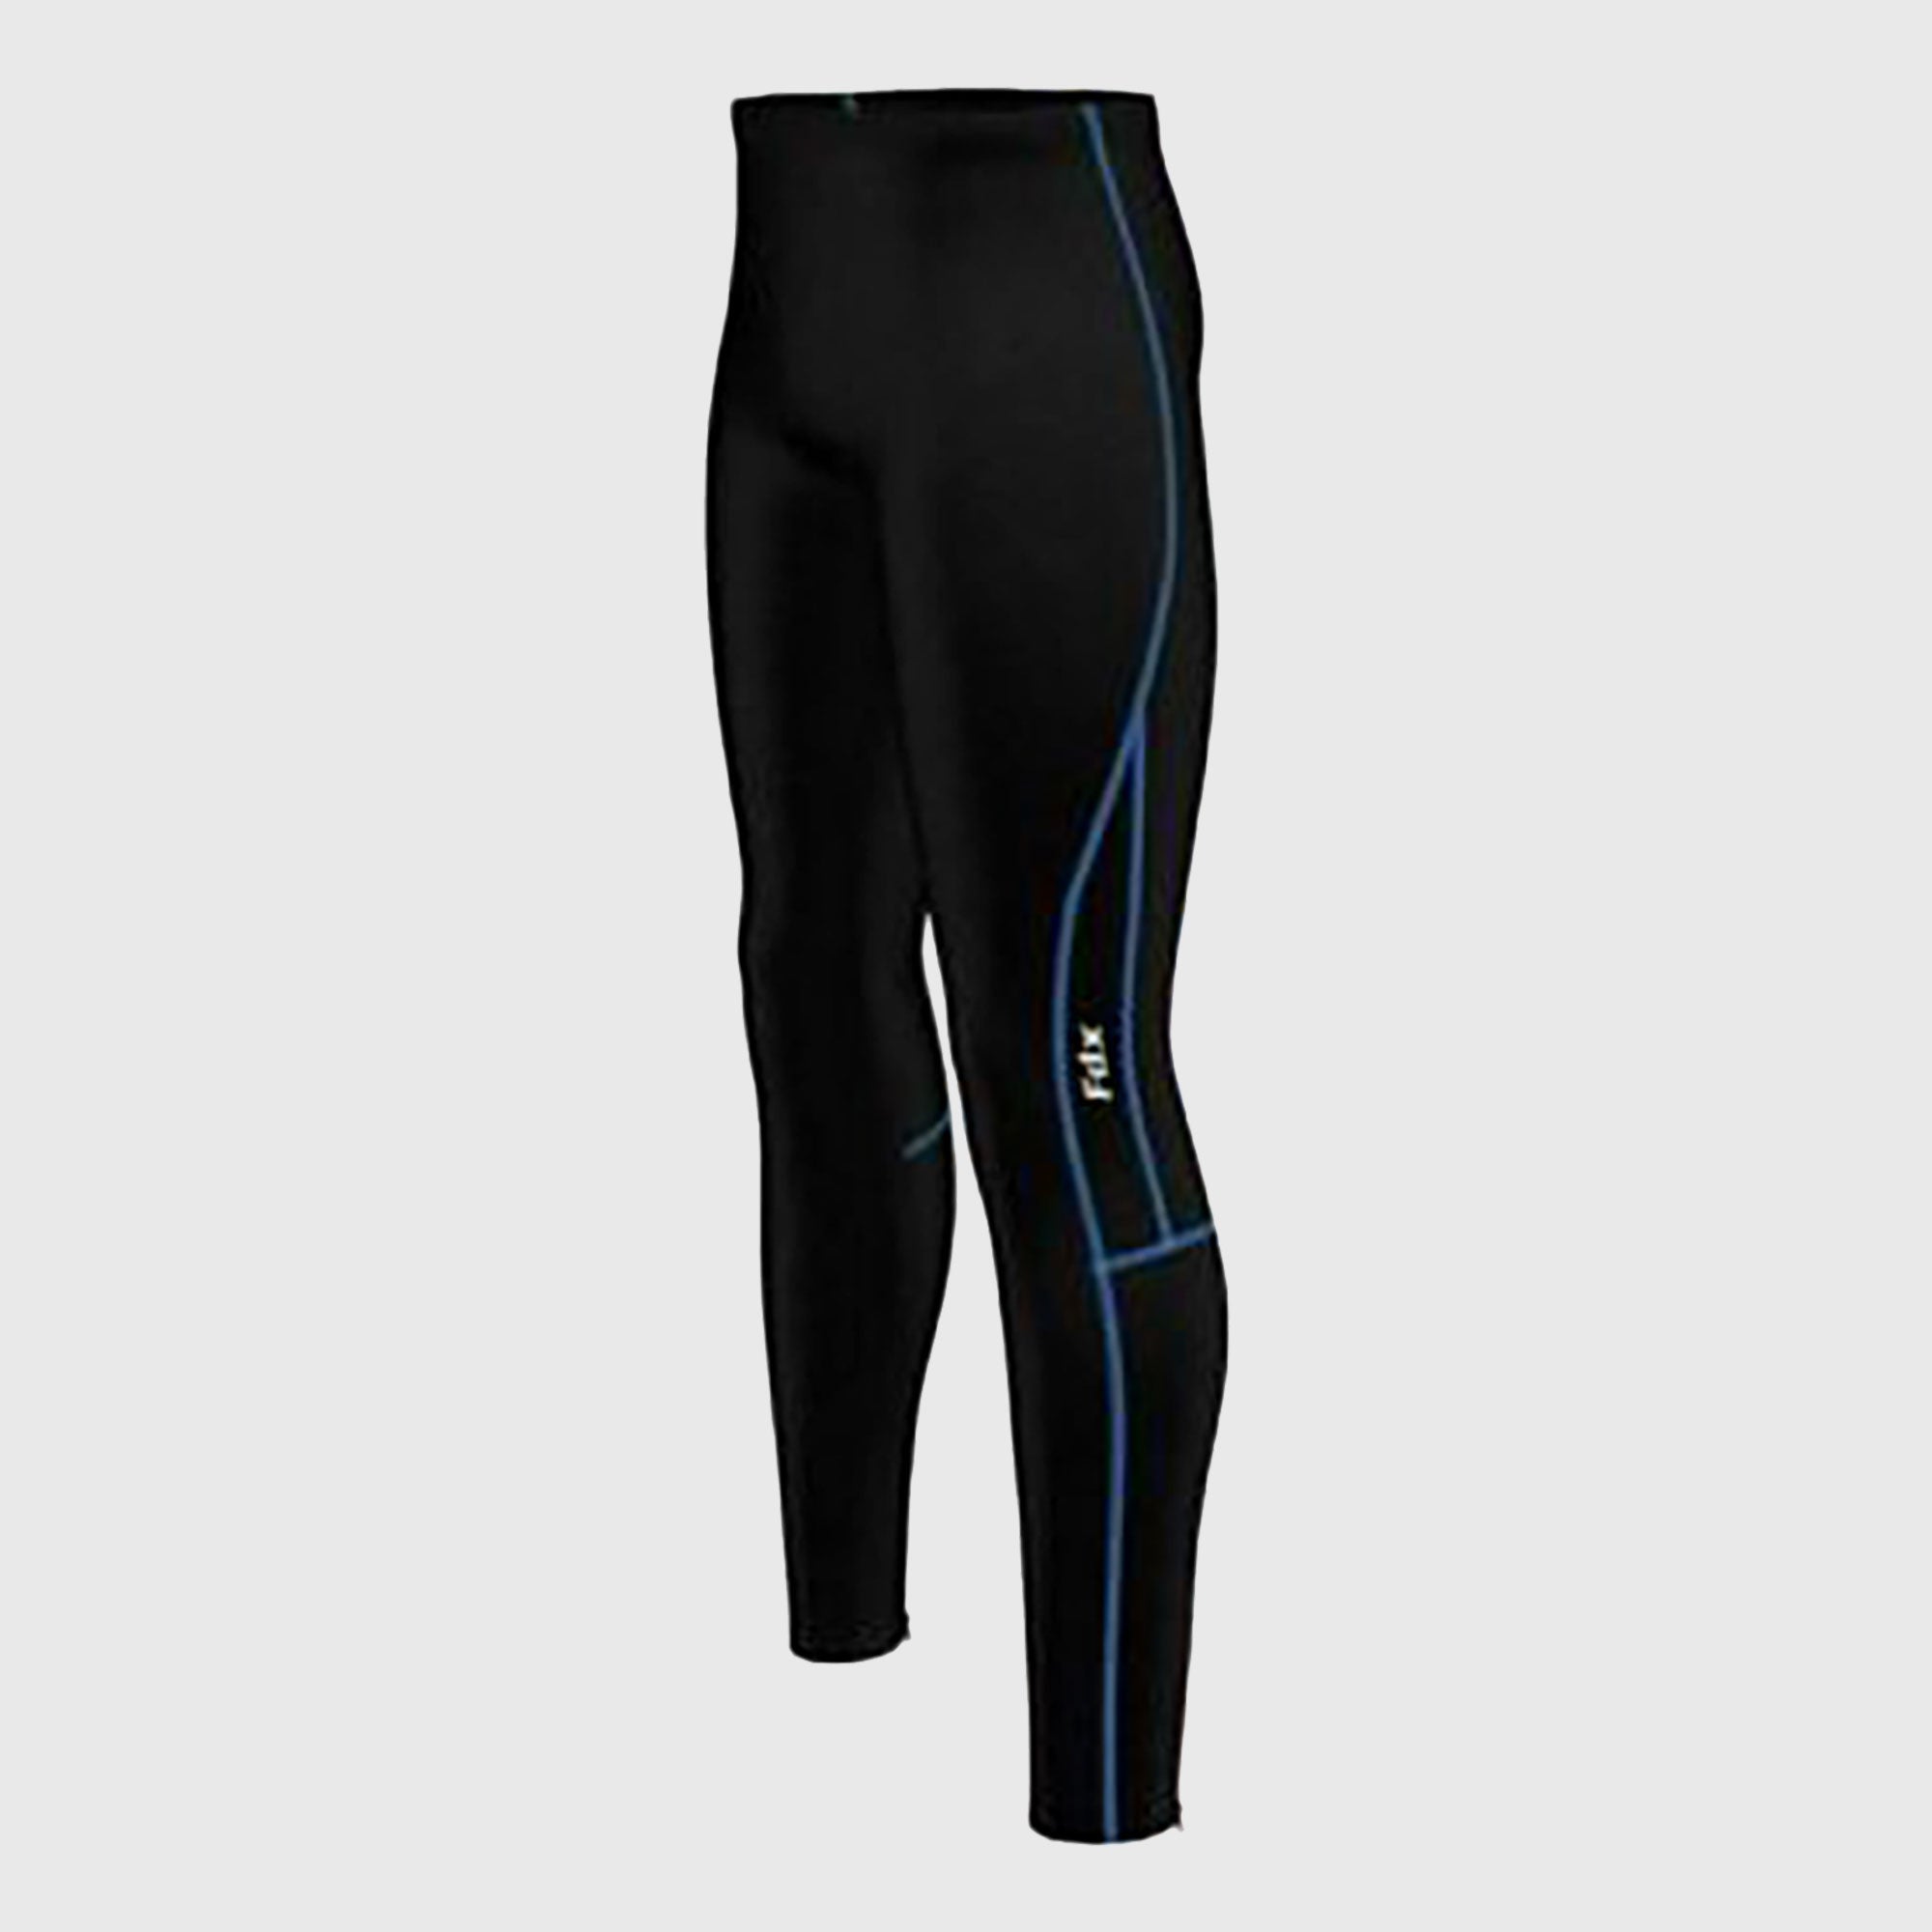 Related: Blue Men 4 Cycling Tights